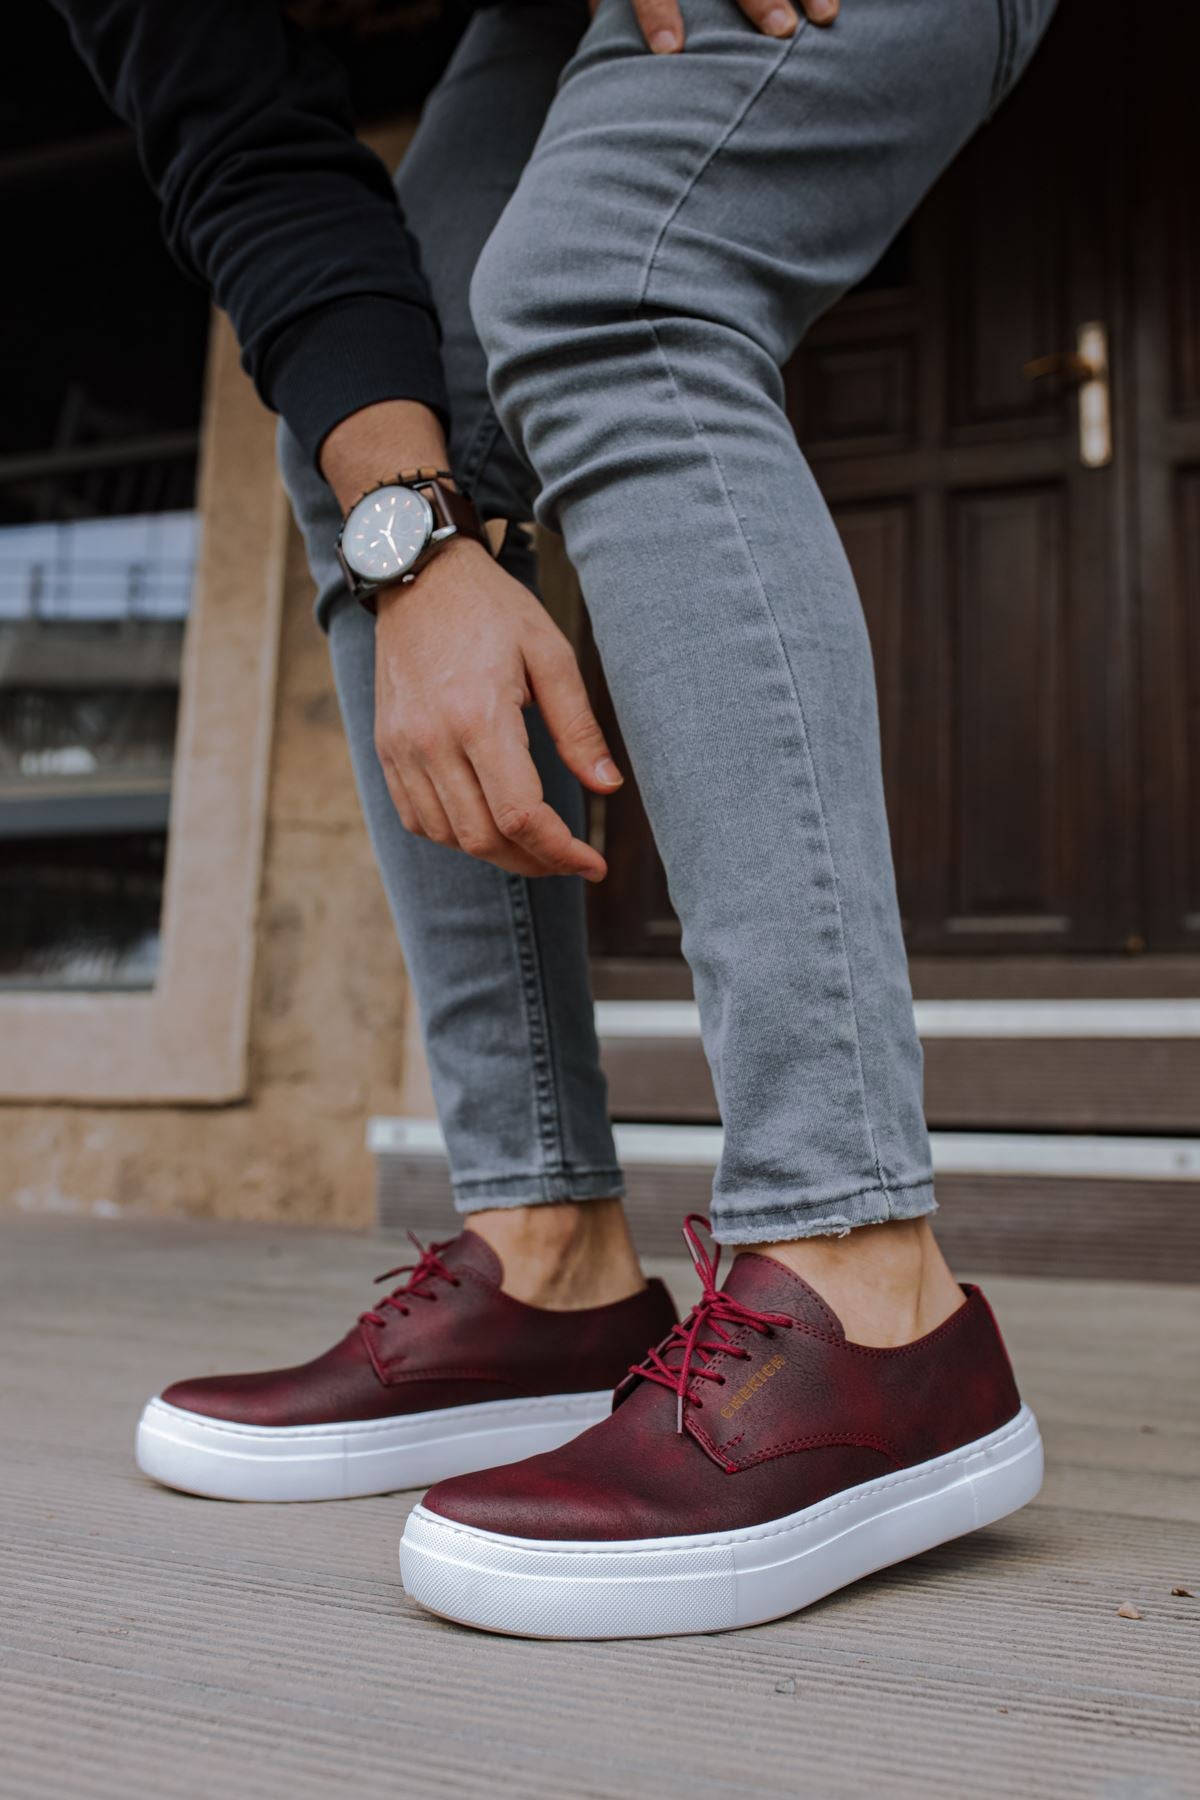 CH005 BT Men's Burgundy-White Sole Pneumatic Leather-Orthopedics Casual Sneaker Sports Shoes - STREETMODE ™